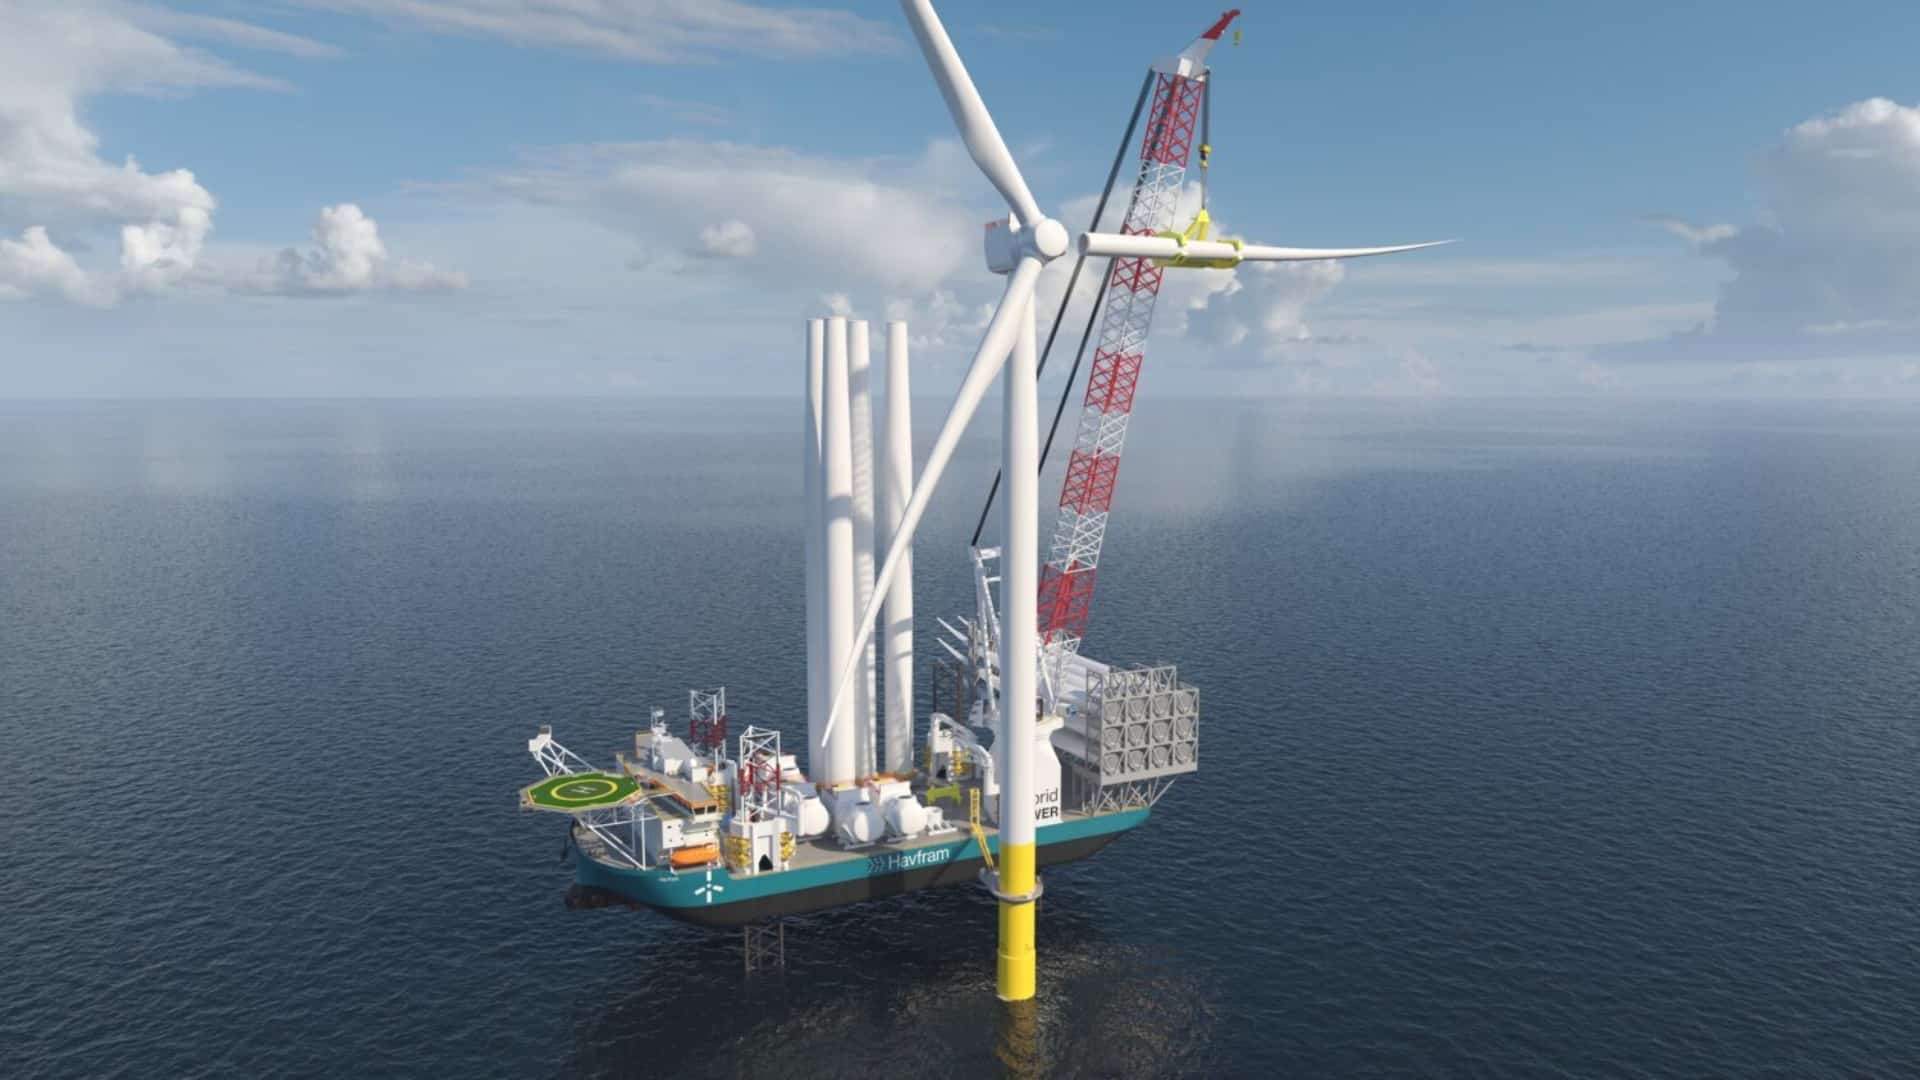 Havfram awarded its first offshore wind contract